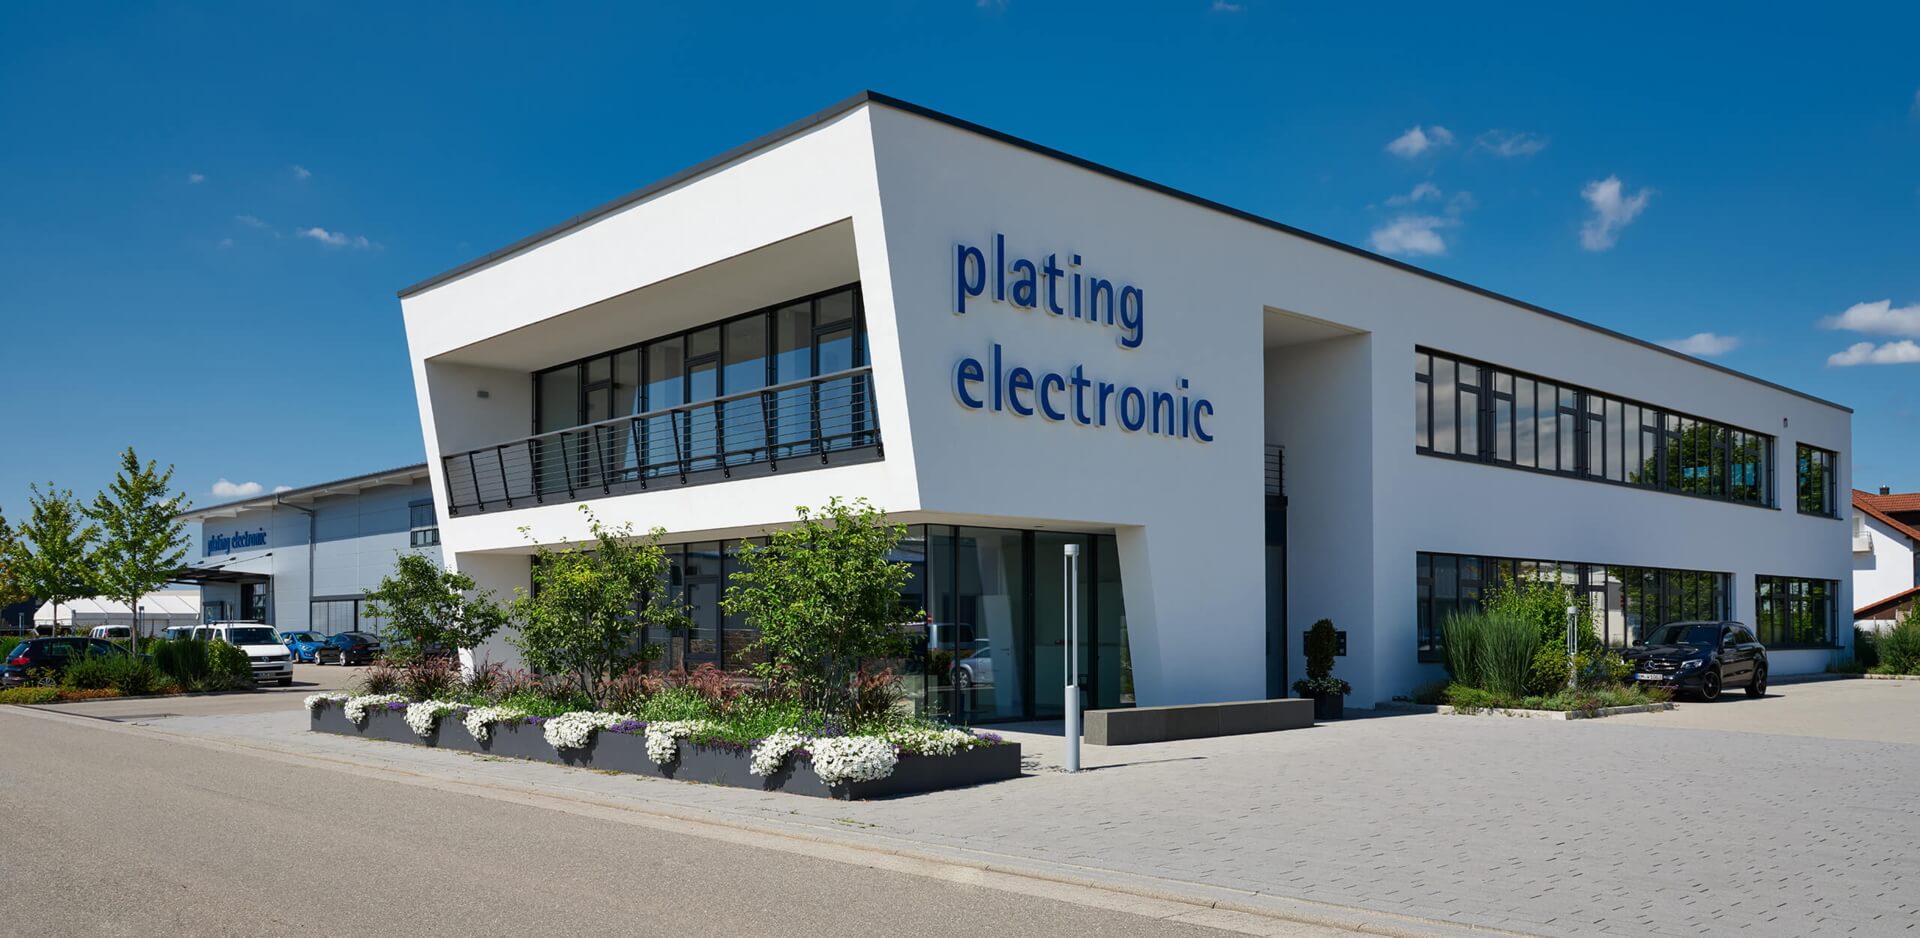 Plating Electronic Building